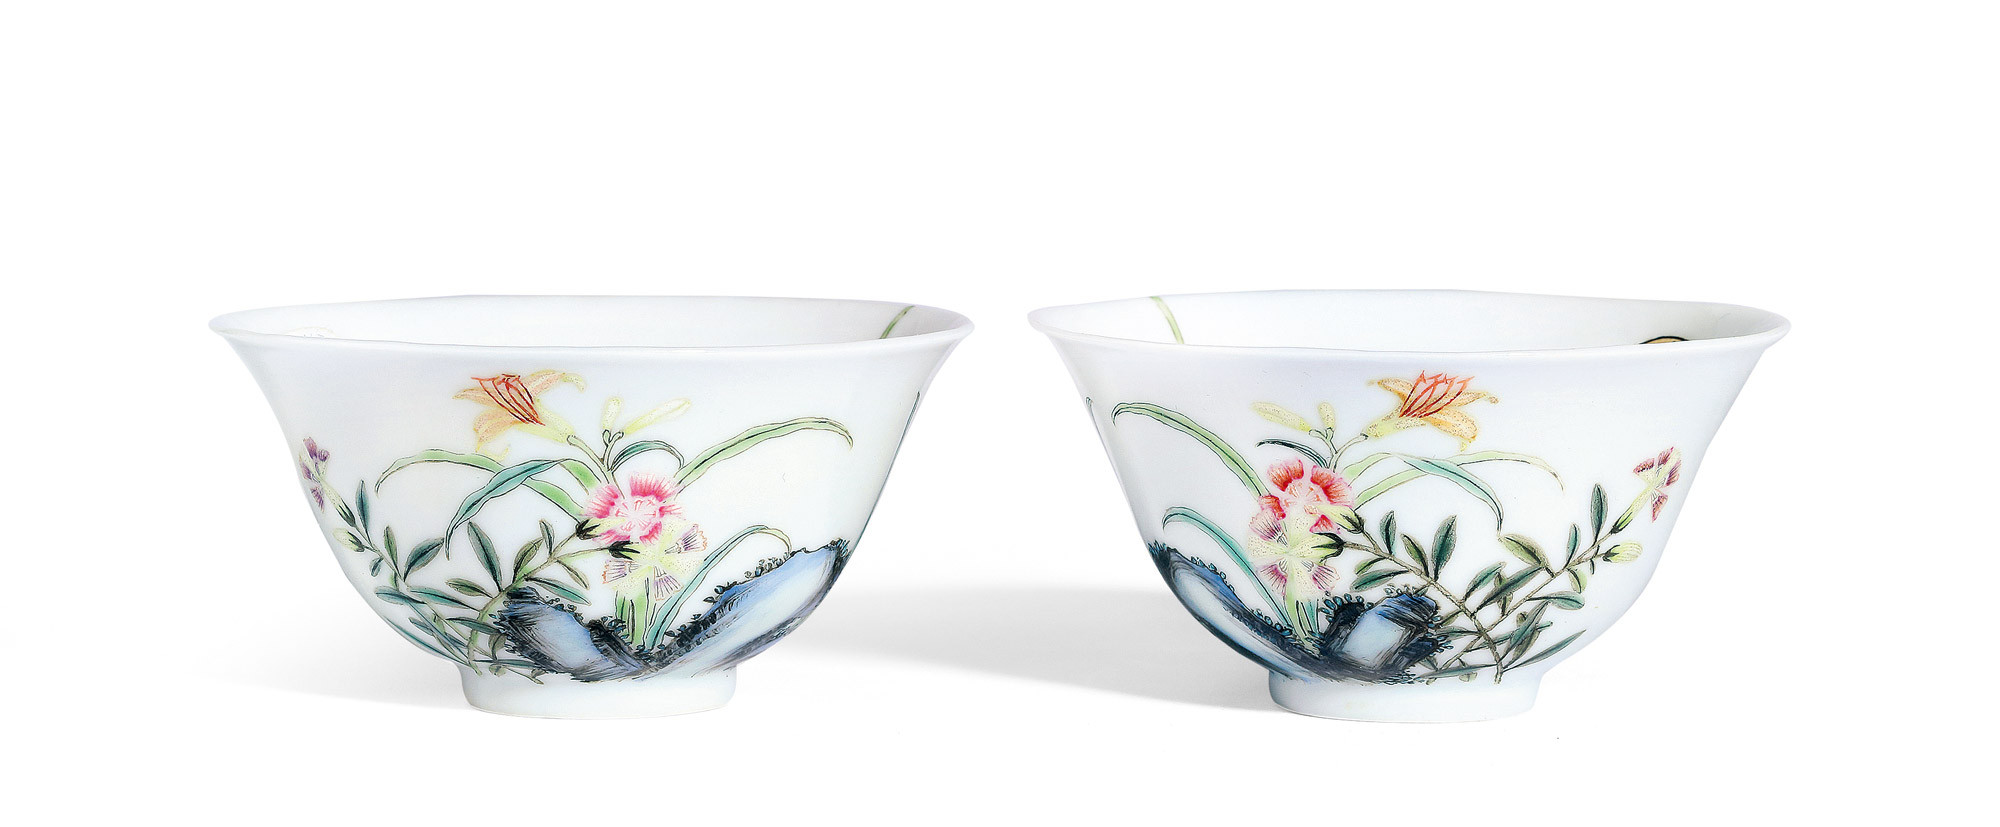 A RARE PAIR OF FAMILLE-ROSE OVER-WALL ‘FLORAL’ CUPS